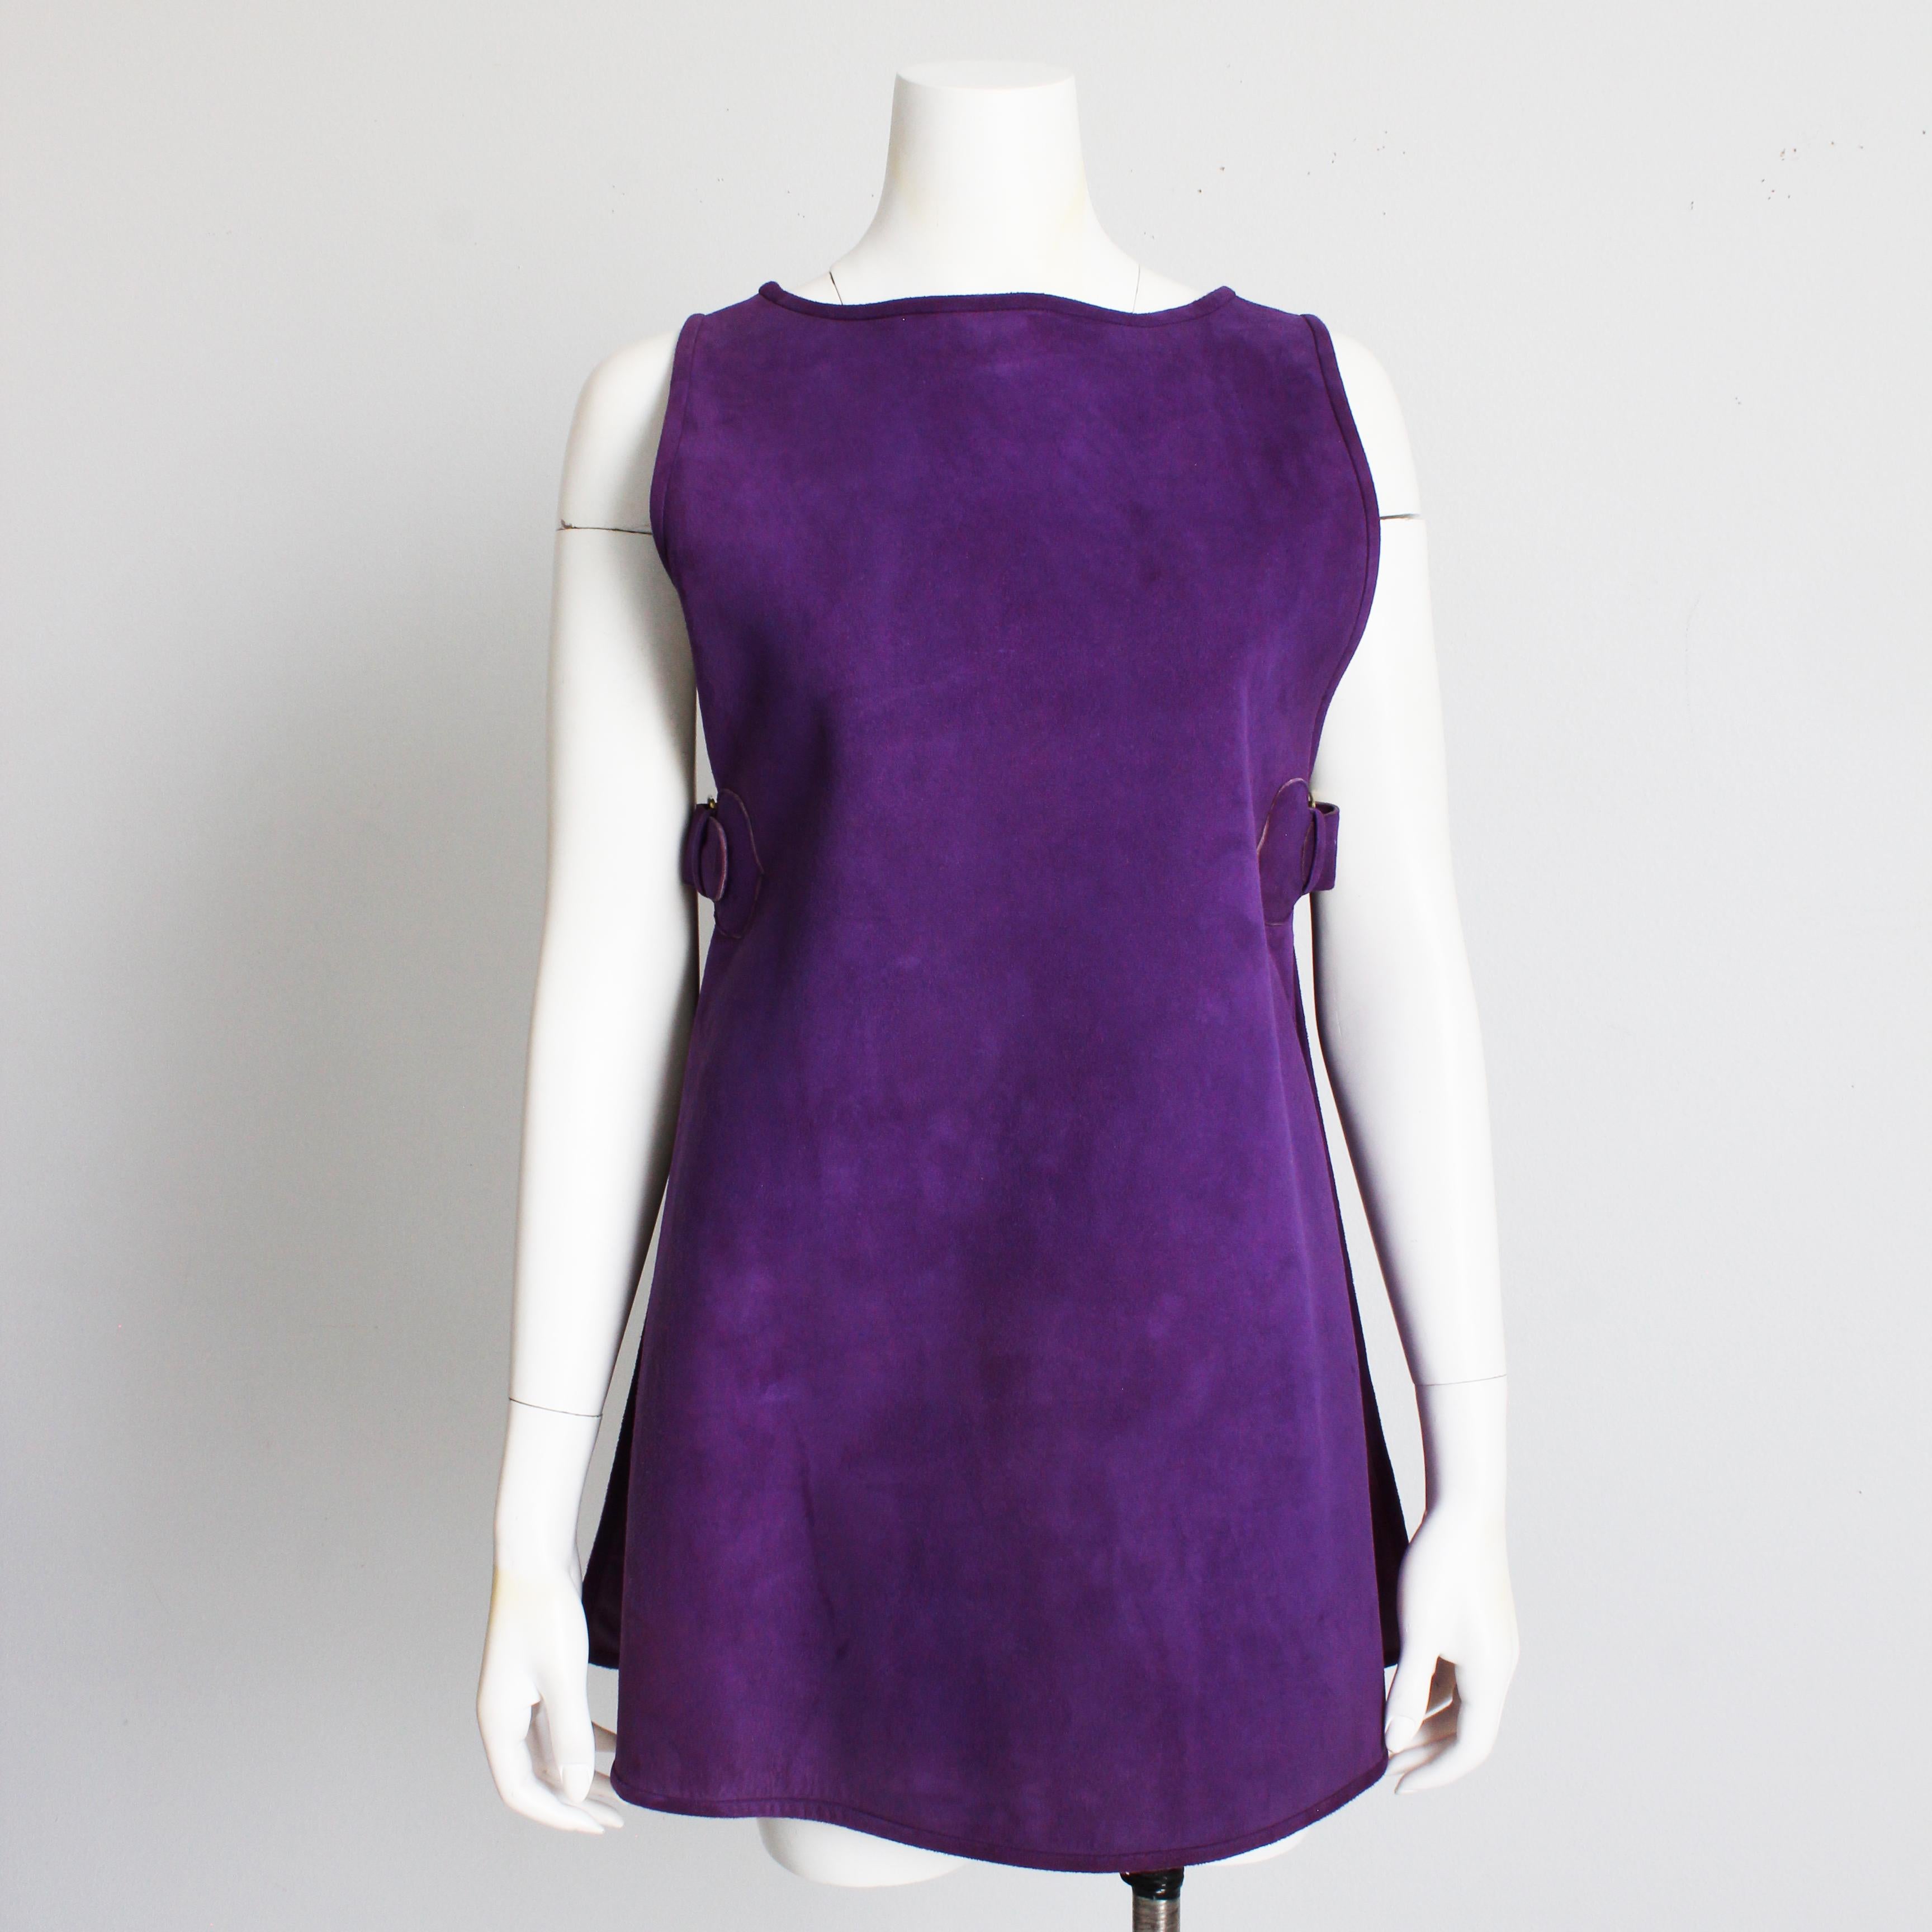 Authentic, preowned, vintage Bonnie Cashin for Sills lilac purple suede tunic dress or tabard, likely made in the 60s. Originally sold by Saks 5th Avenue, where it retailed for $100 (which is now worth $1010 in todays dollars!!)  Made from a a